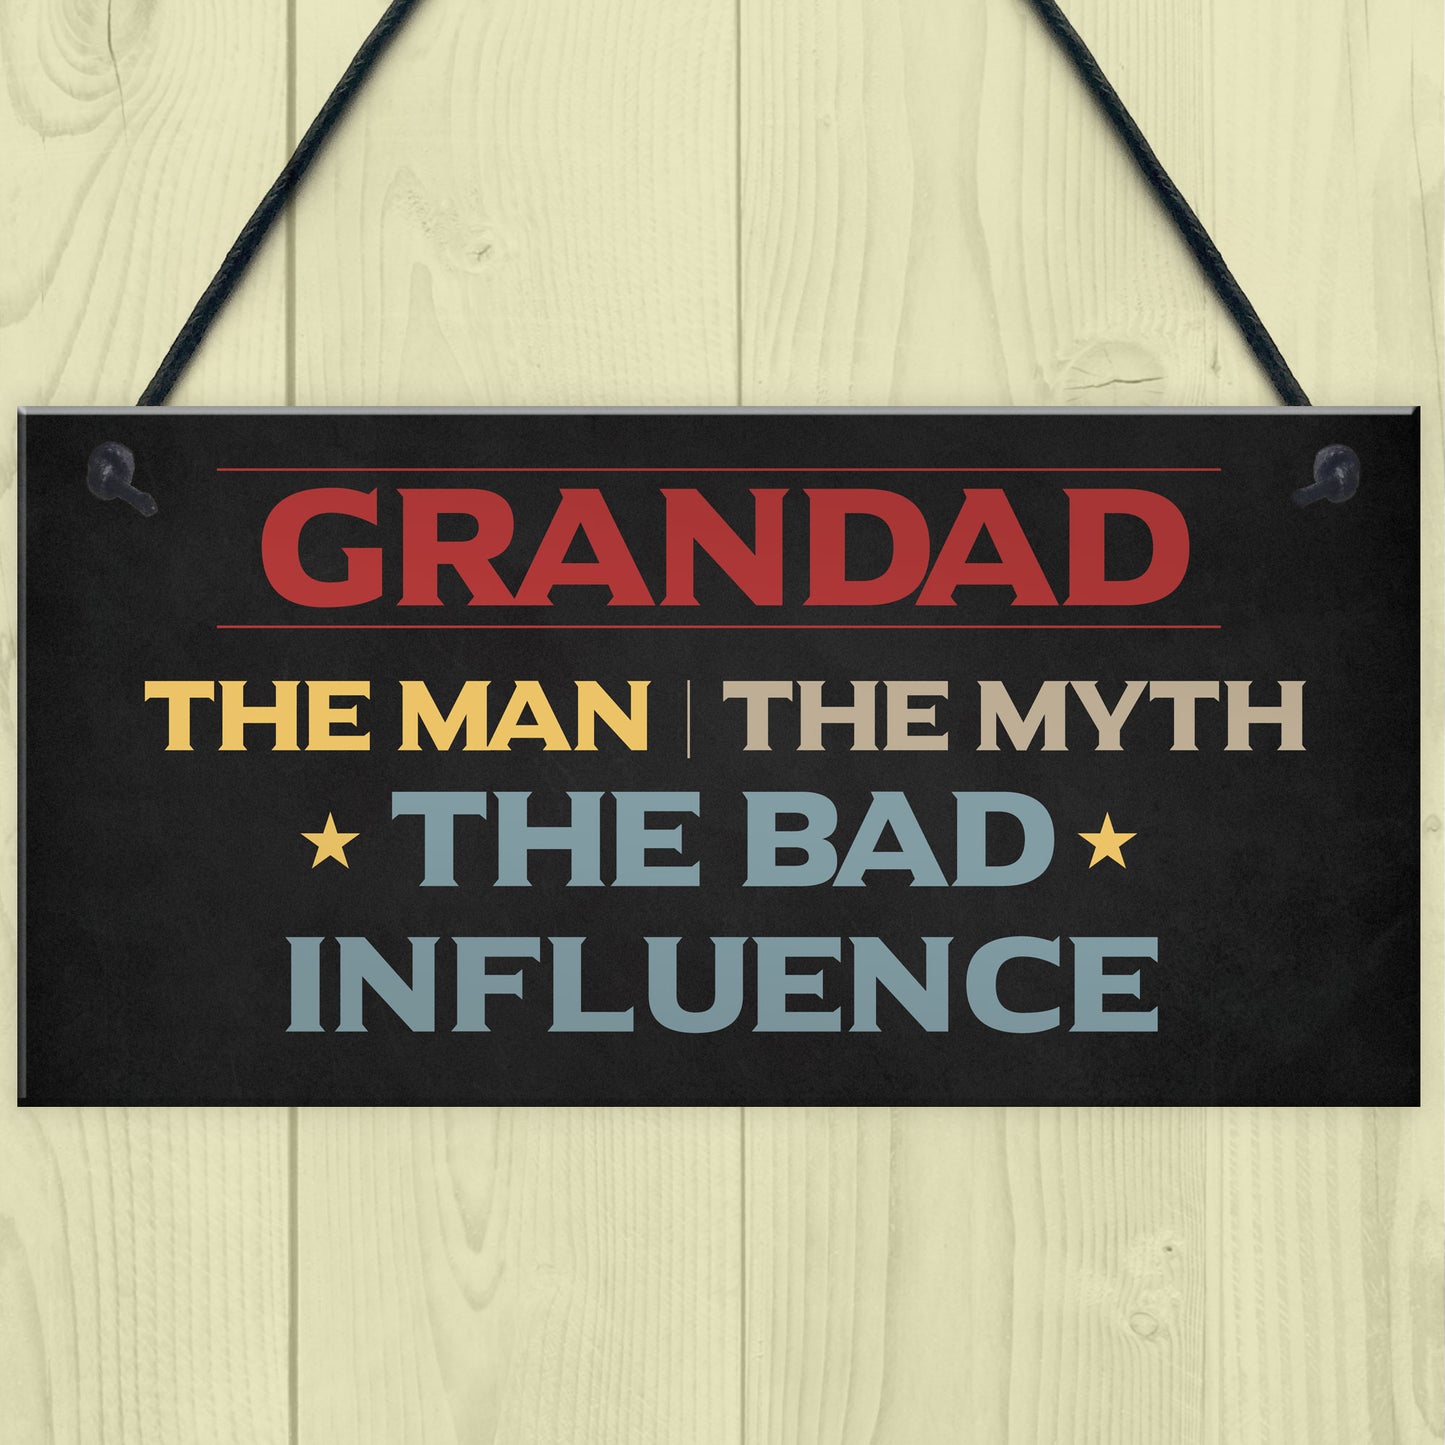 Grandad Gift Novelty Hanging Plaque Fathers Day Birthday Gifts